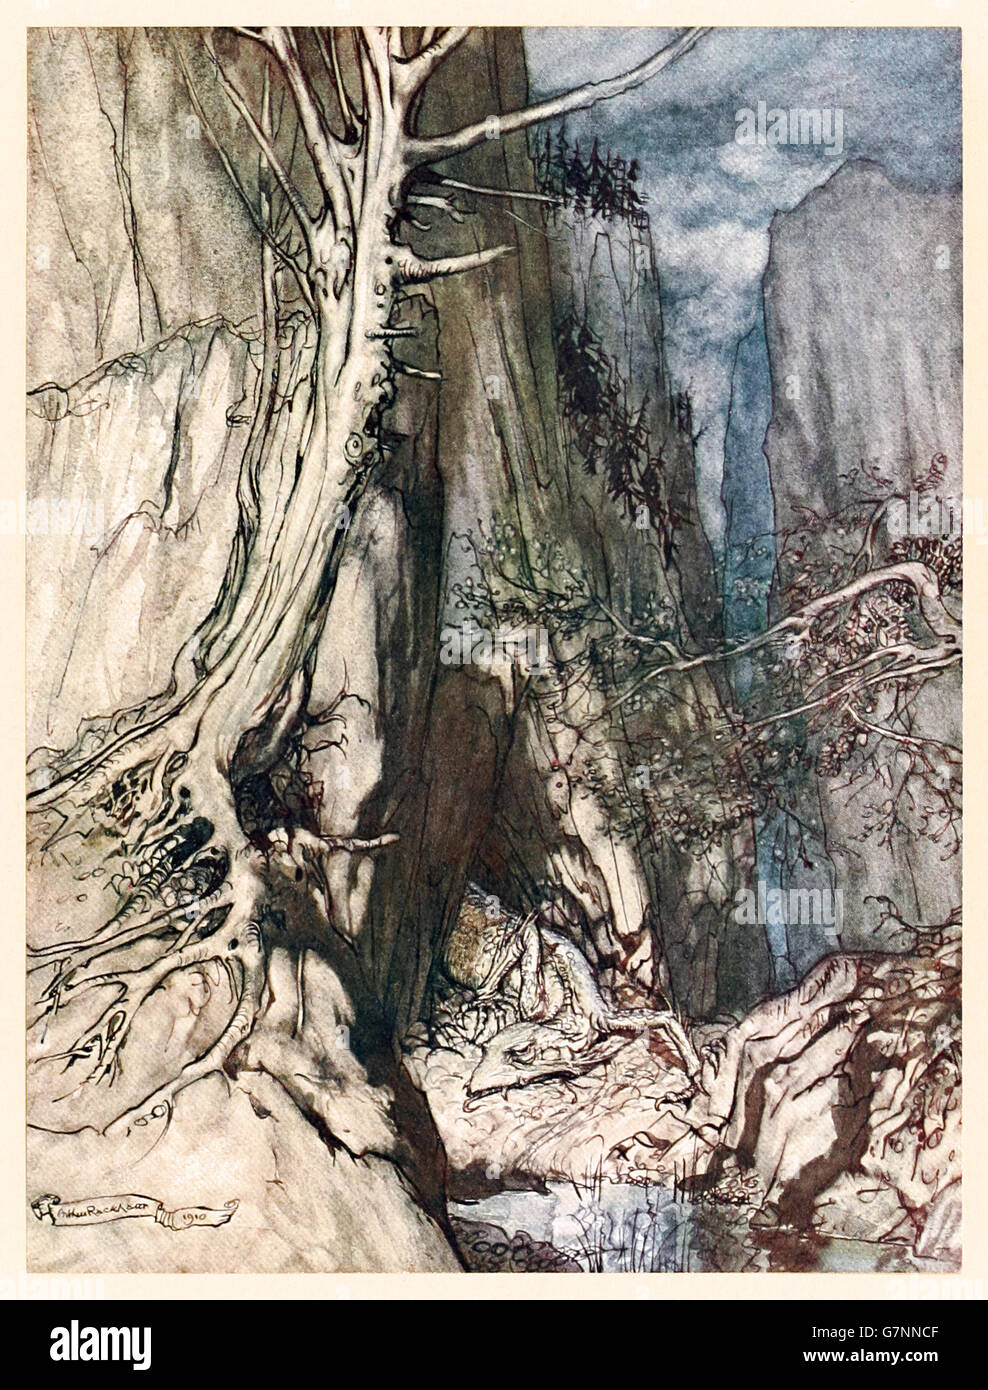 “There as a dread Dragon he sojourns, And in a cave Keeps watch over Alberich’s ring” from ‘The Rhinegold & the Valkyrie’ illustrated by Arthur Rackham (1867-1939), published in 1910. The giant Fafner transforms into a dragon guards his hoard in the forest. Stock Photo